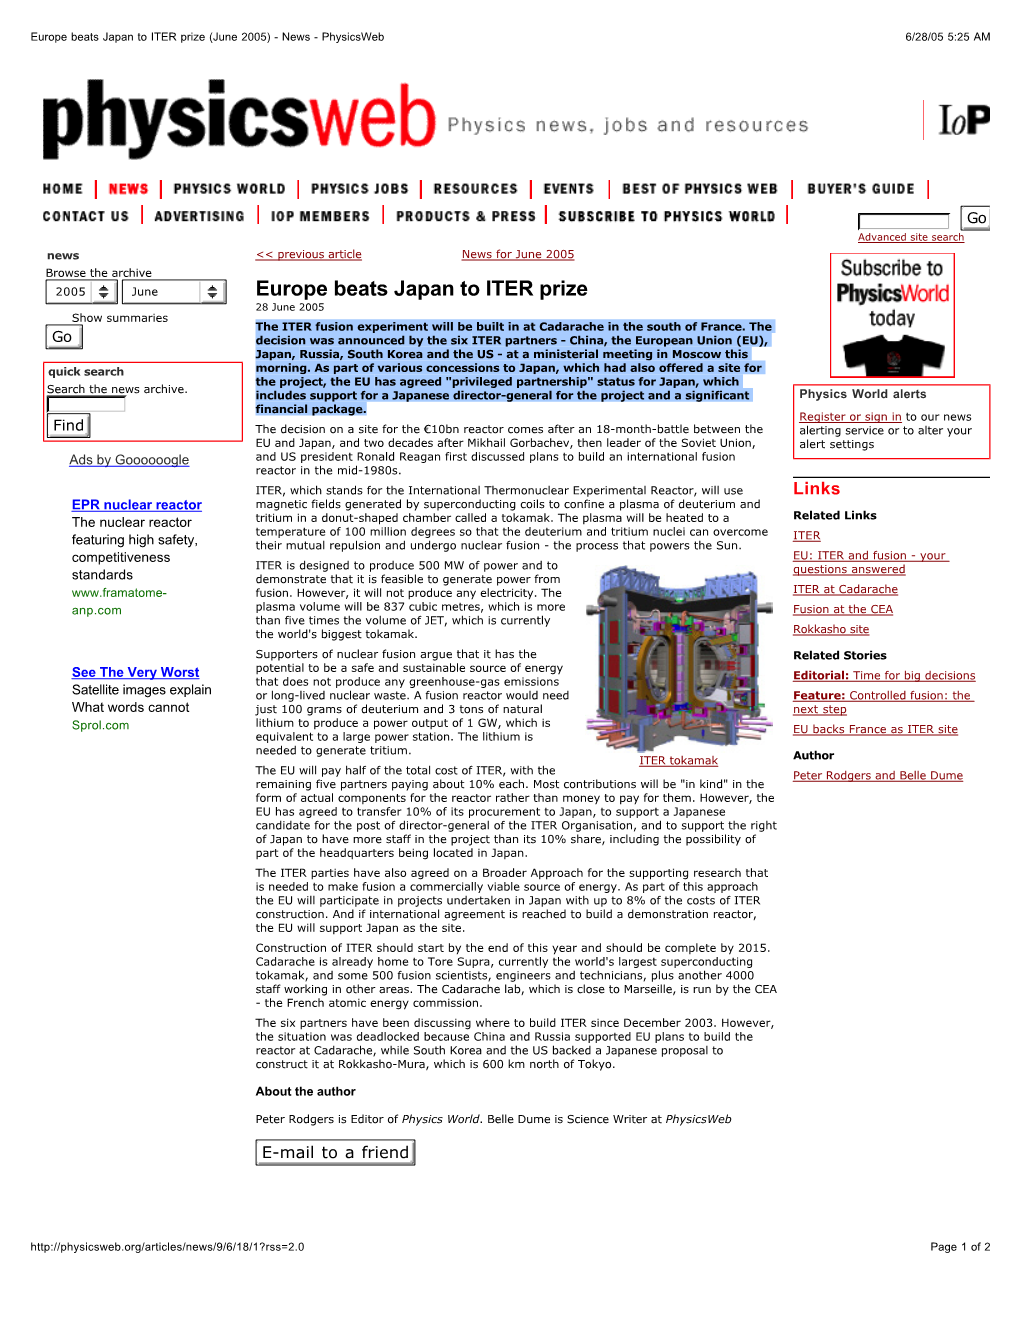 Europe Beats Japan to ITER Prize (June 2005) - News - Physicsweb 6/28/05 5:25 AM